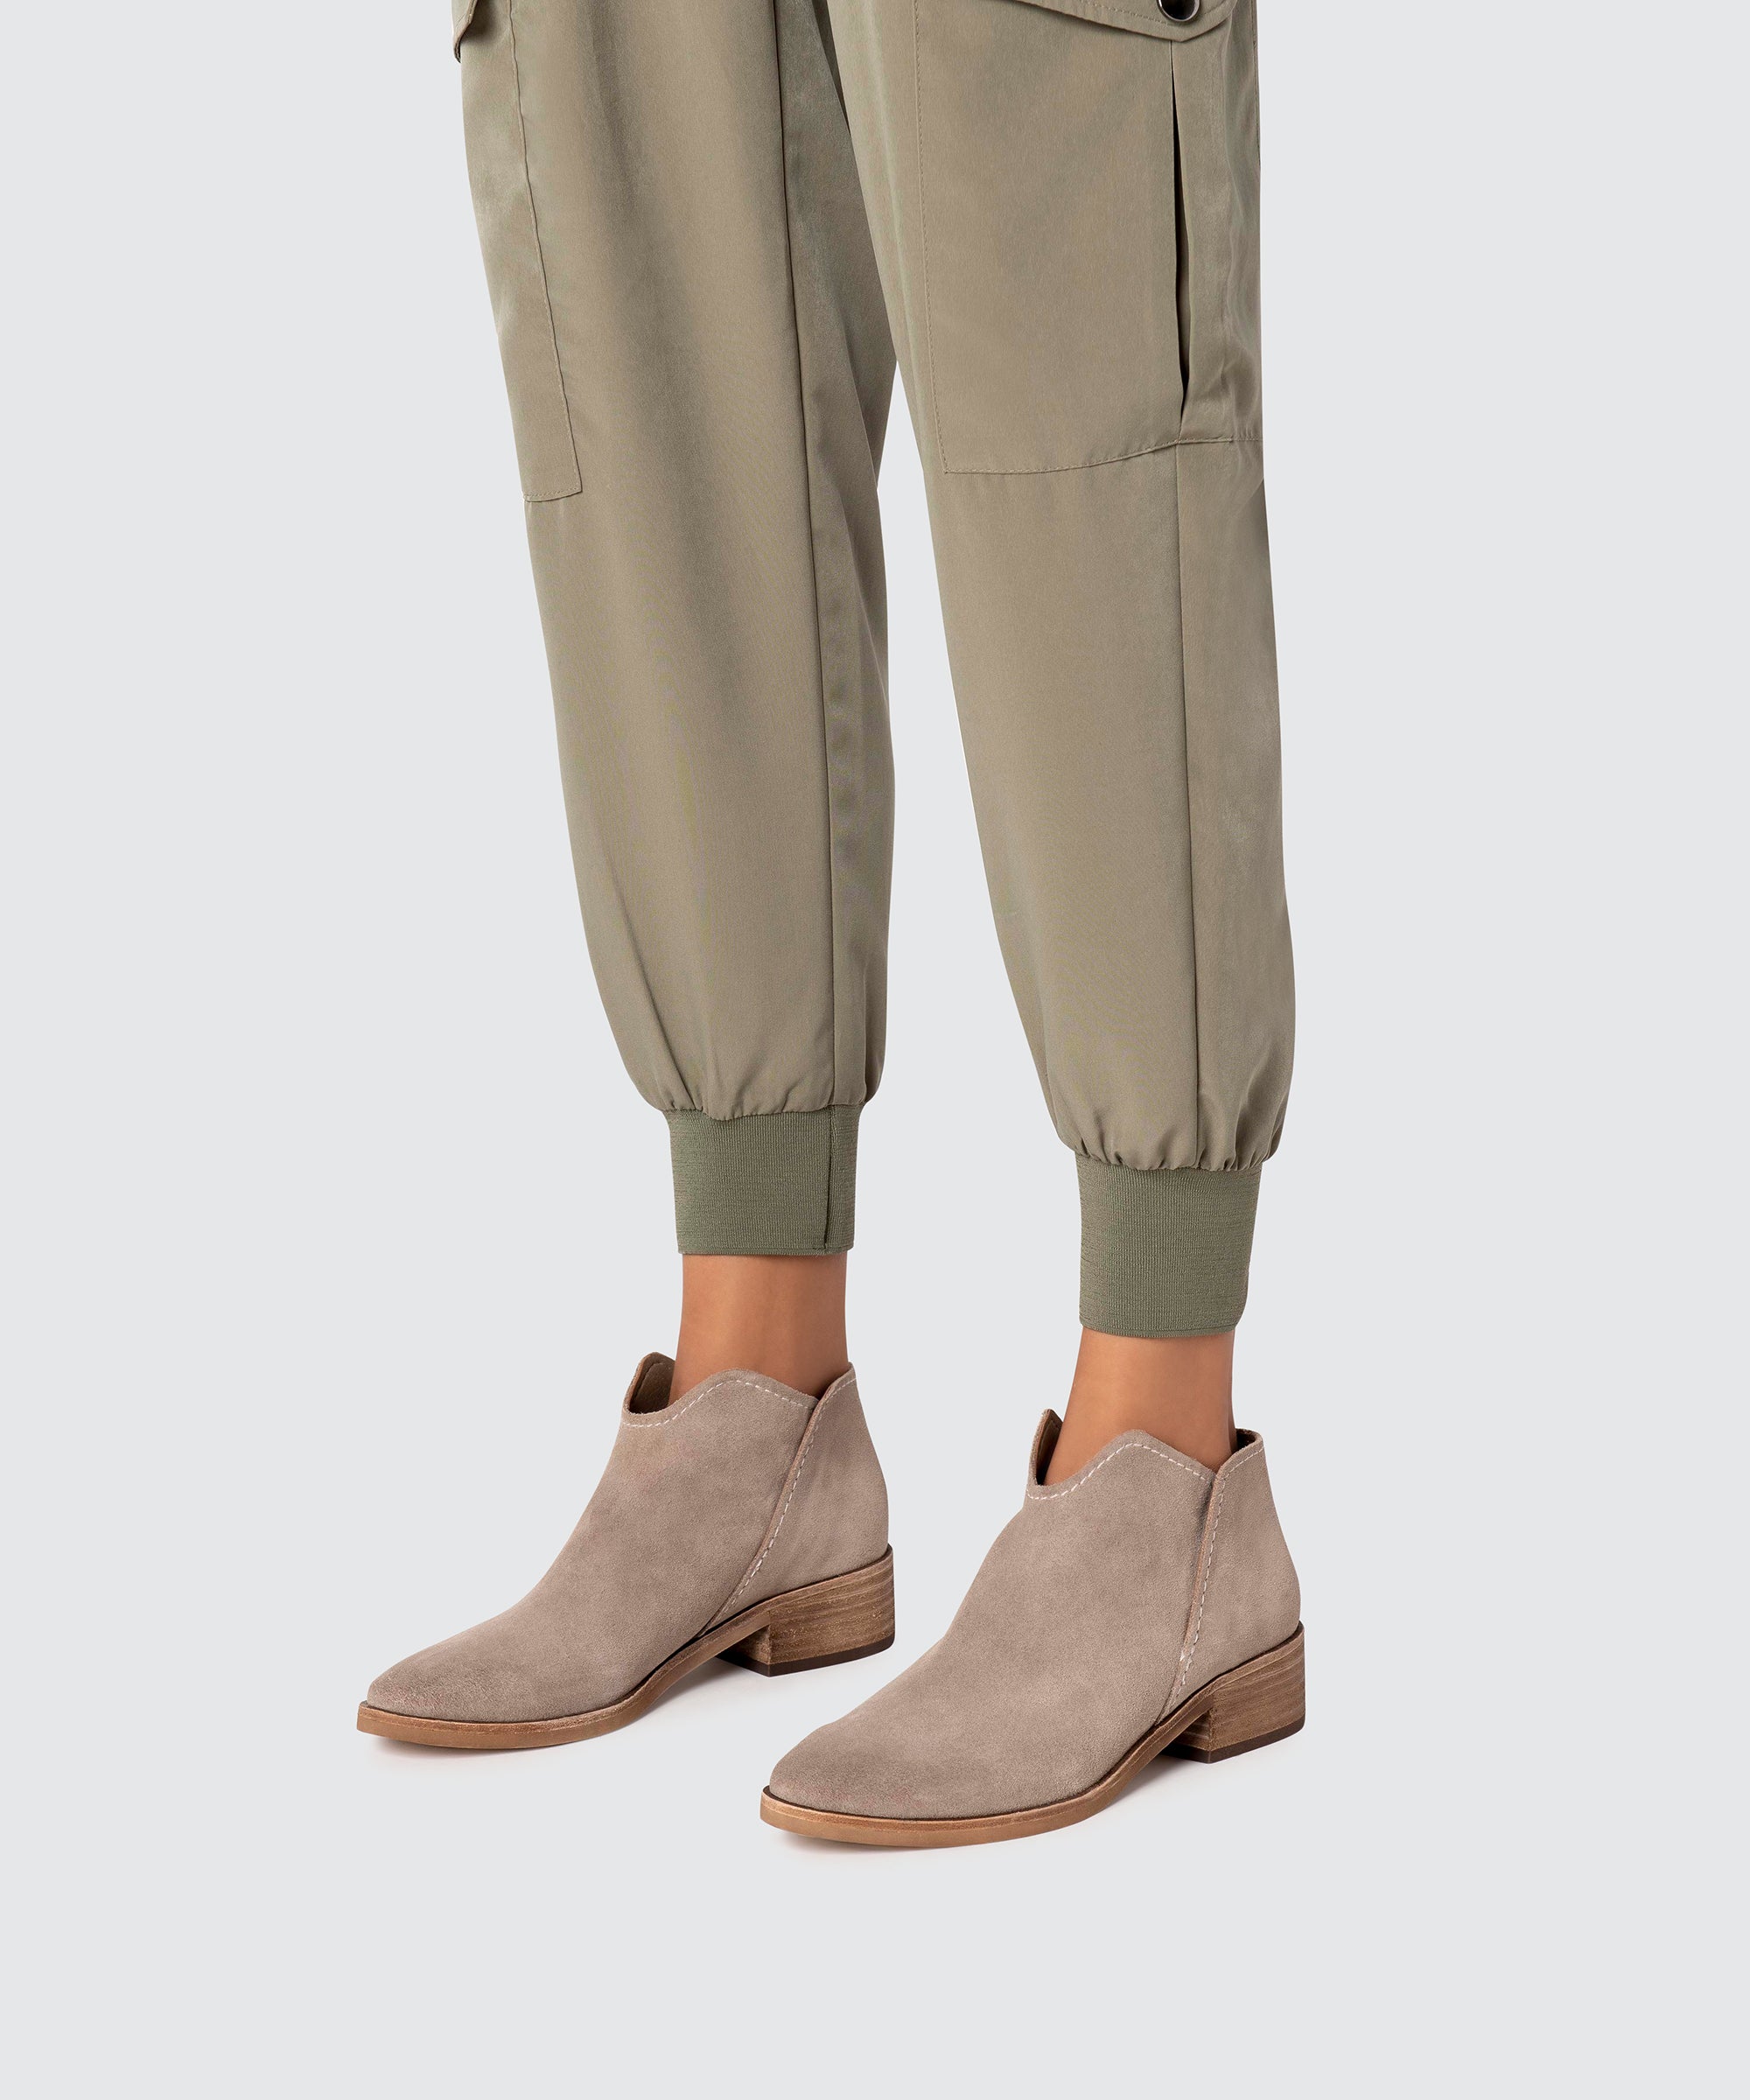 TRIST BOOTIES IN DK TAUPE – Dolce Vita